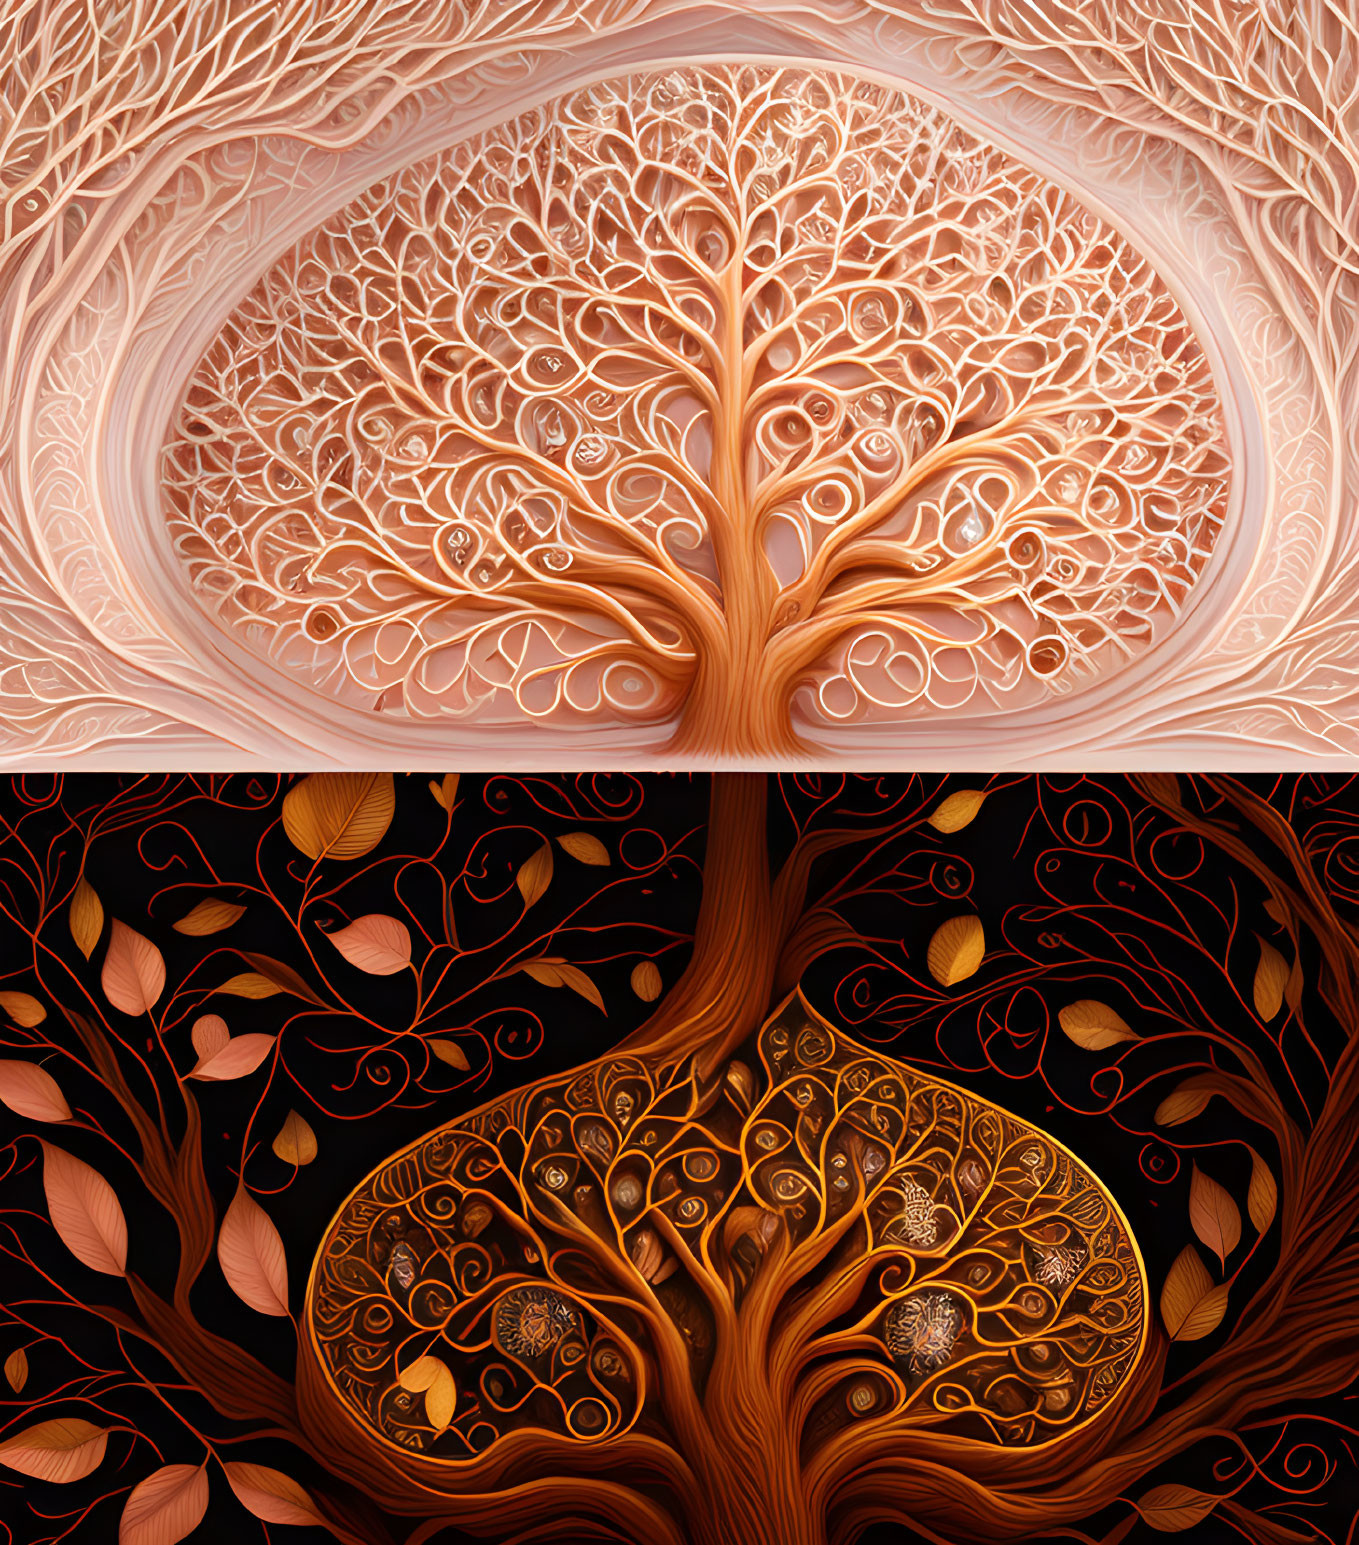 Stylized image of two trees with intricate branches in warm tones